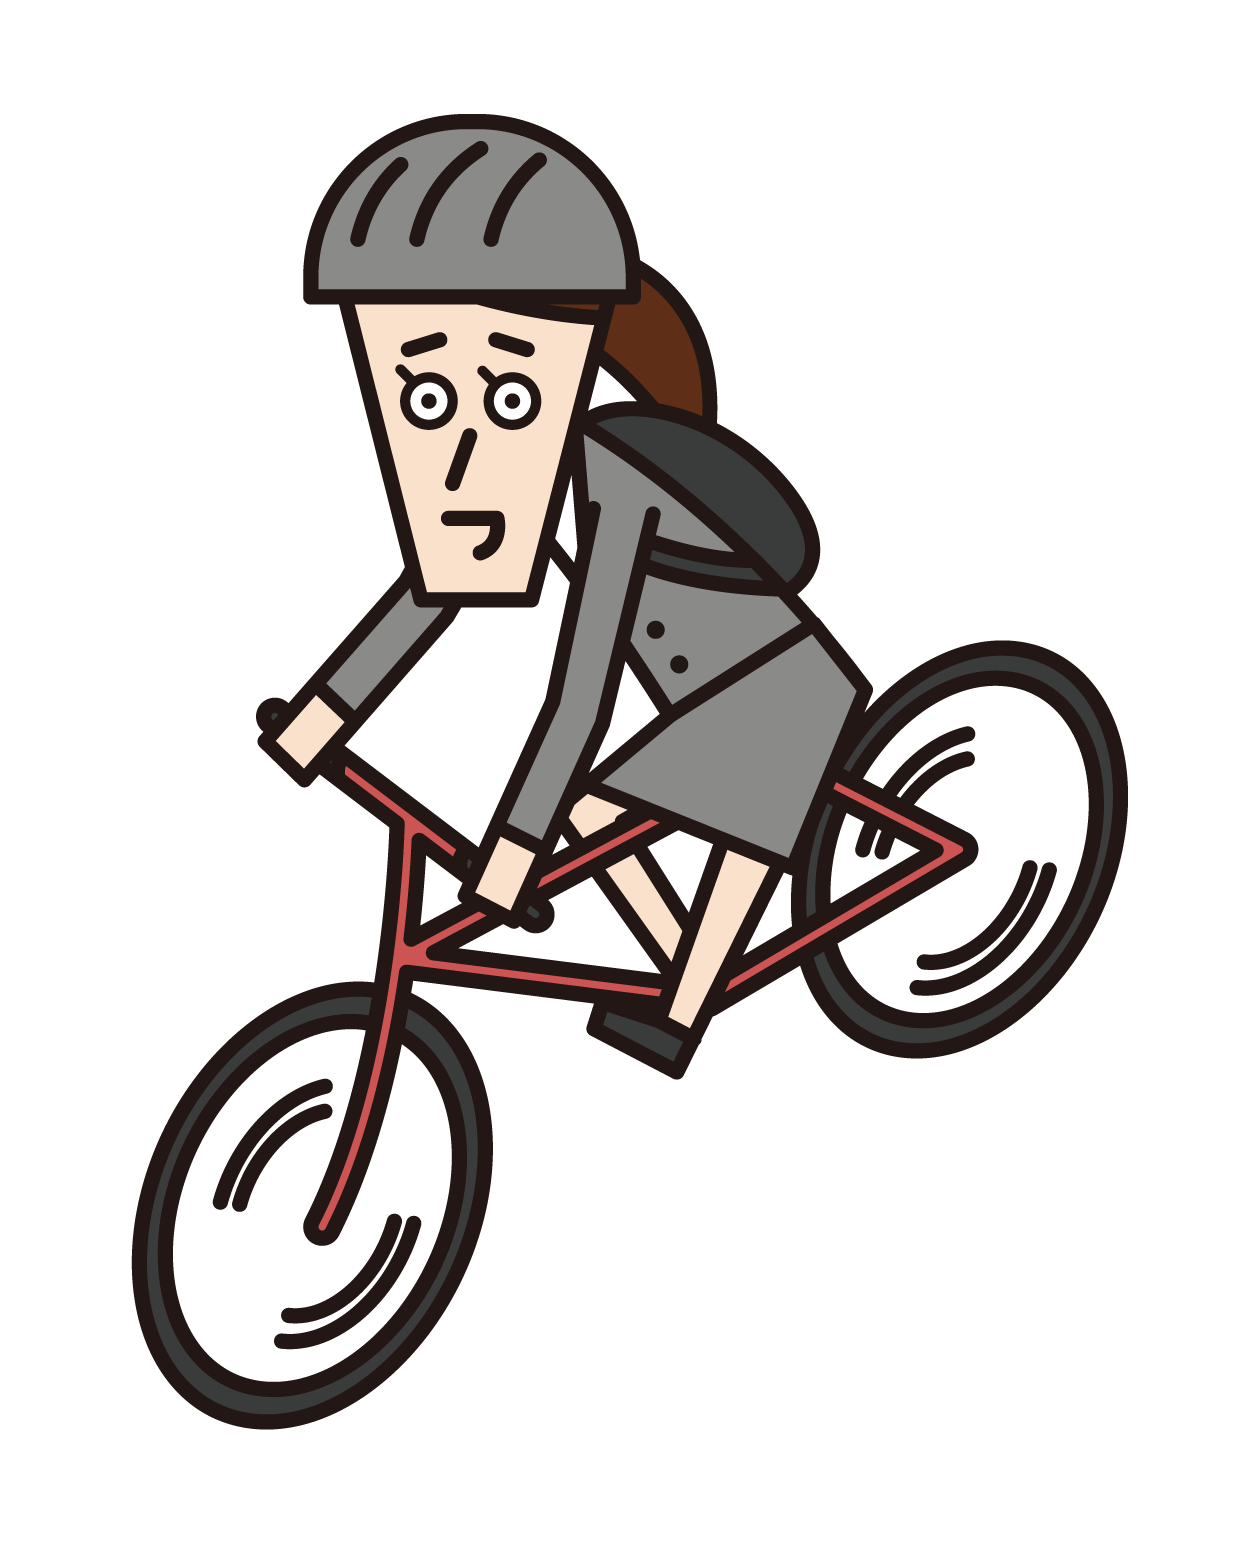 Illustration of a cyclist (male) who is about to collide with a car